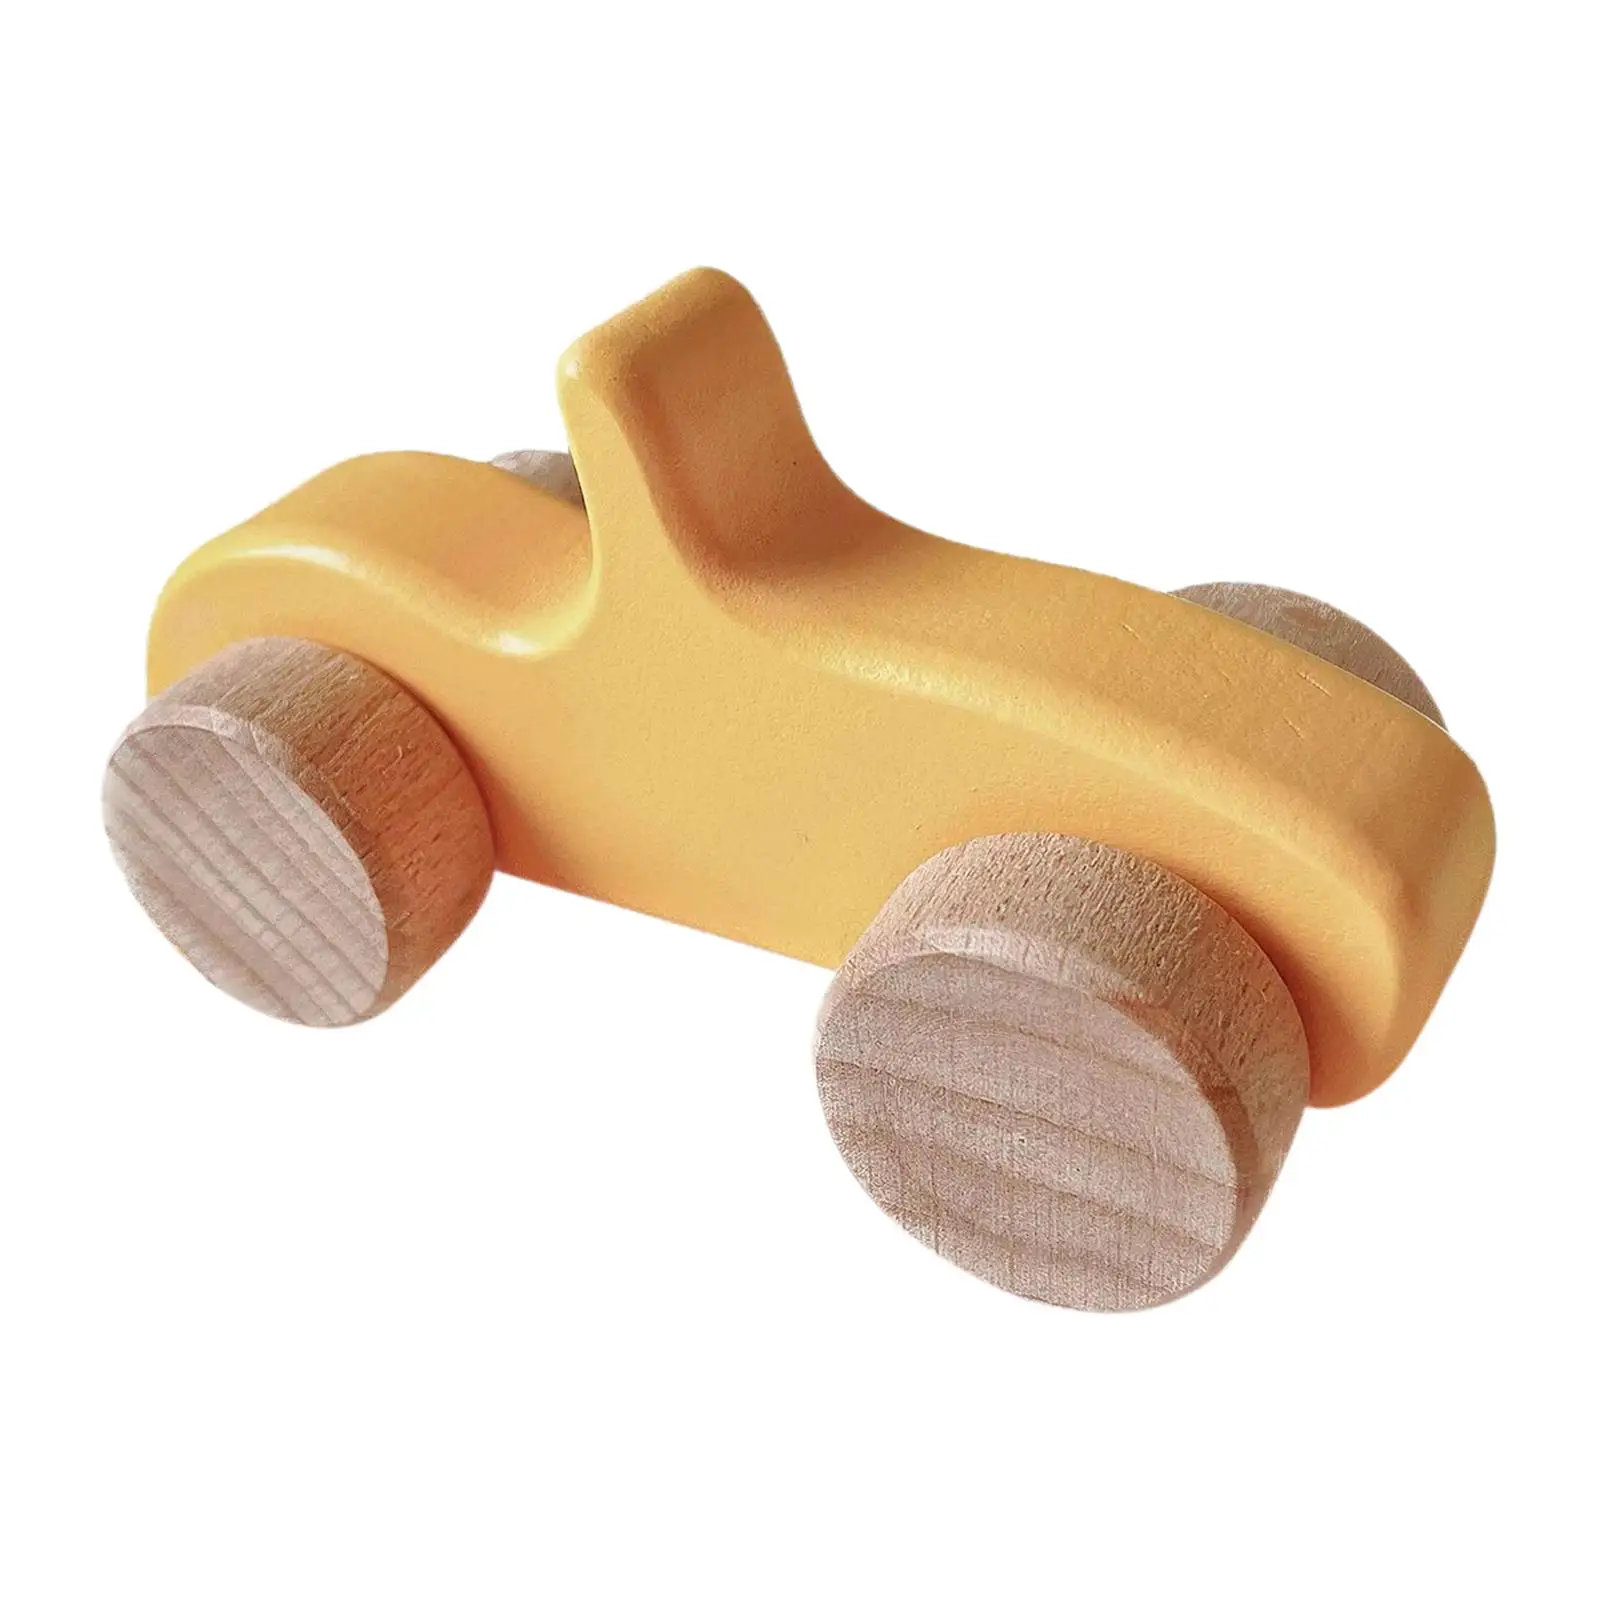 Smooth Wooden Vehicles Baby Grasping Toys Push Car Toys Wood Push Truck Vehicle for 1 2 Year Old Infant Toddlers